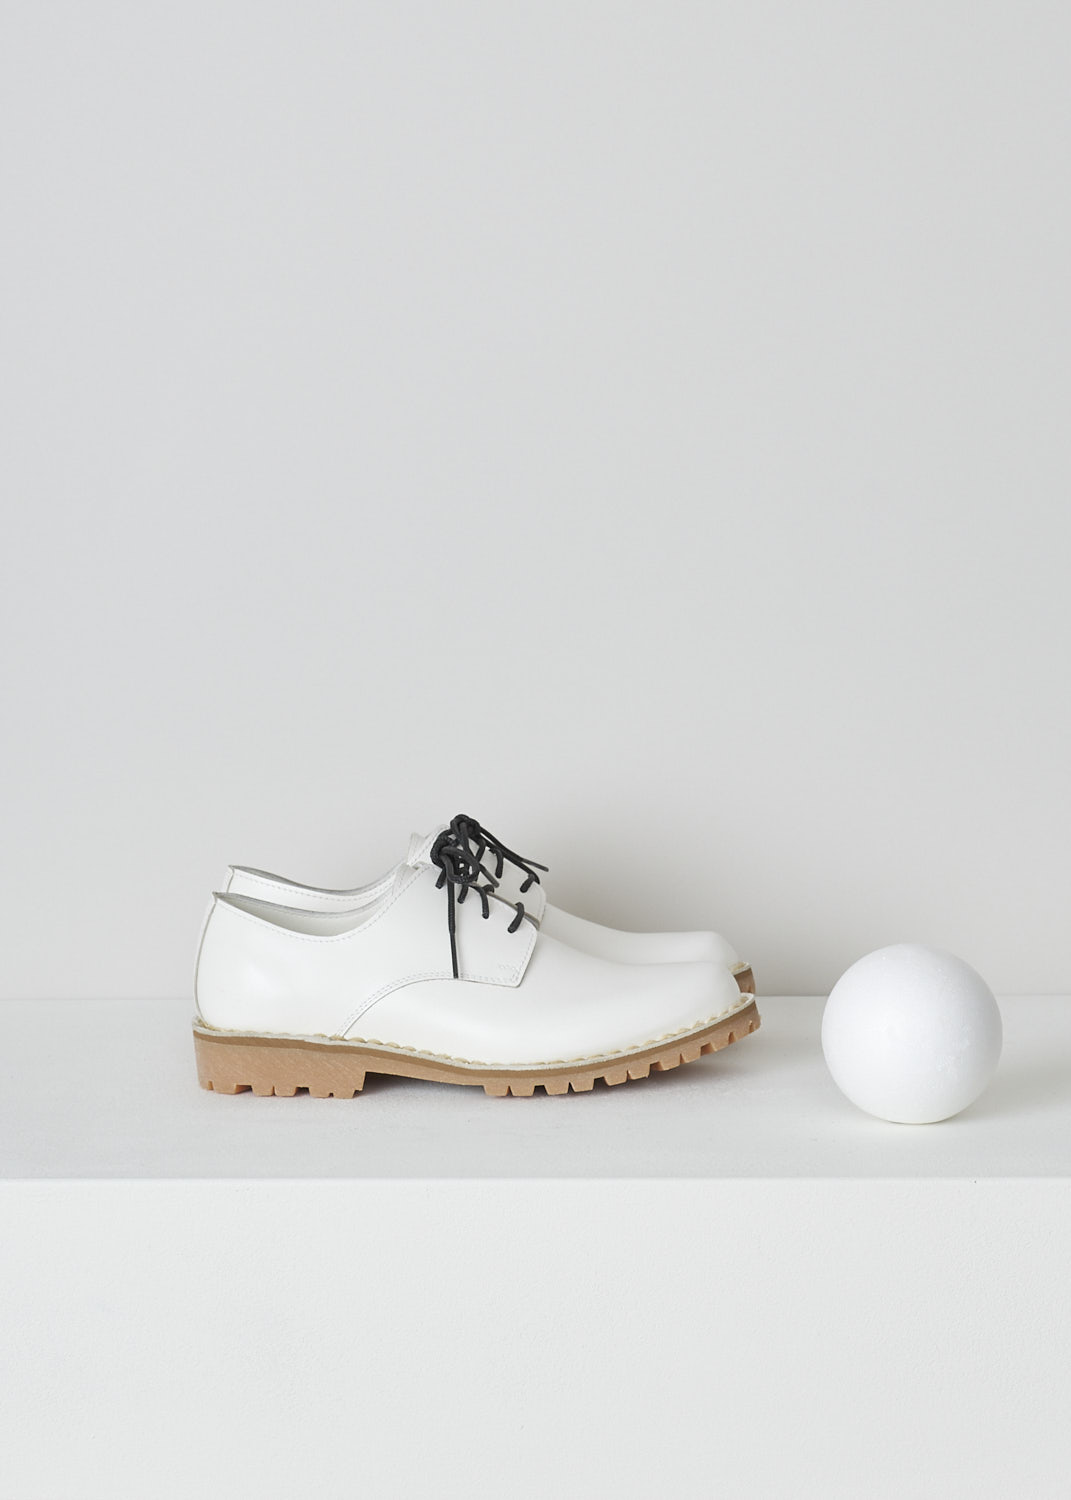 SOFIE Dâ€™HOORE, WHITE DERBY SHOES WITH BLACK LACES, FILOS_LJAZ_WHITE, White, Side, These white leather derby shoes have a round nose and a classic lace-up closing with contrasting black laces. The shoes have sturdy Vibram soles. 

